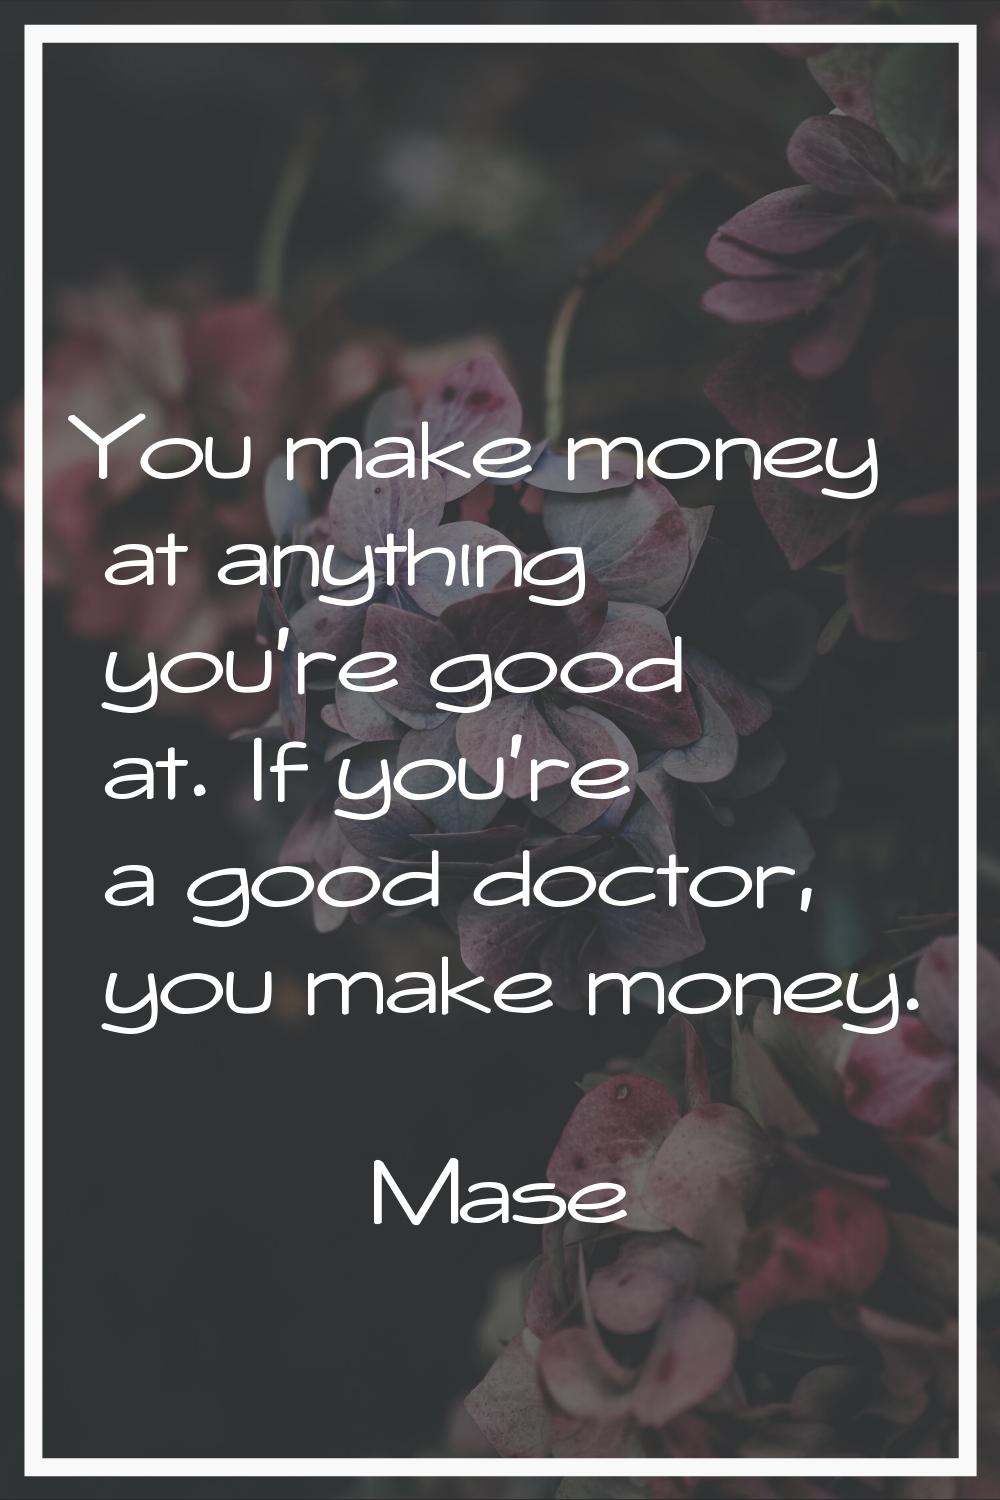 You make money at anything you're good at. If you're a good doctor, you make money.